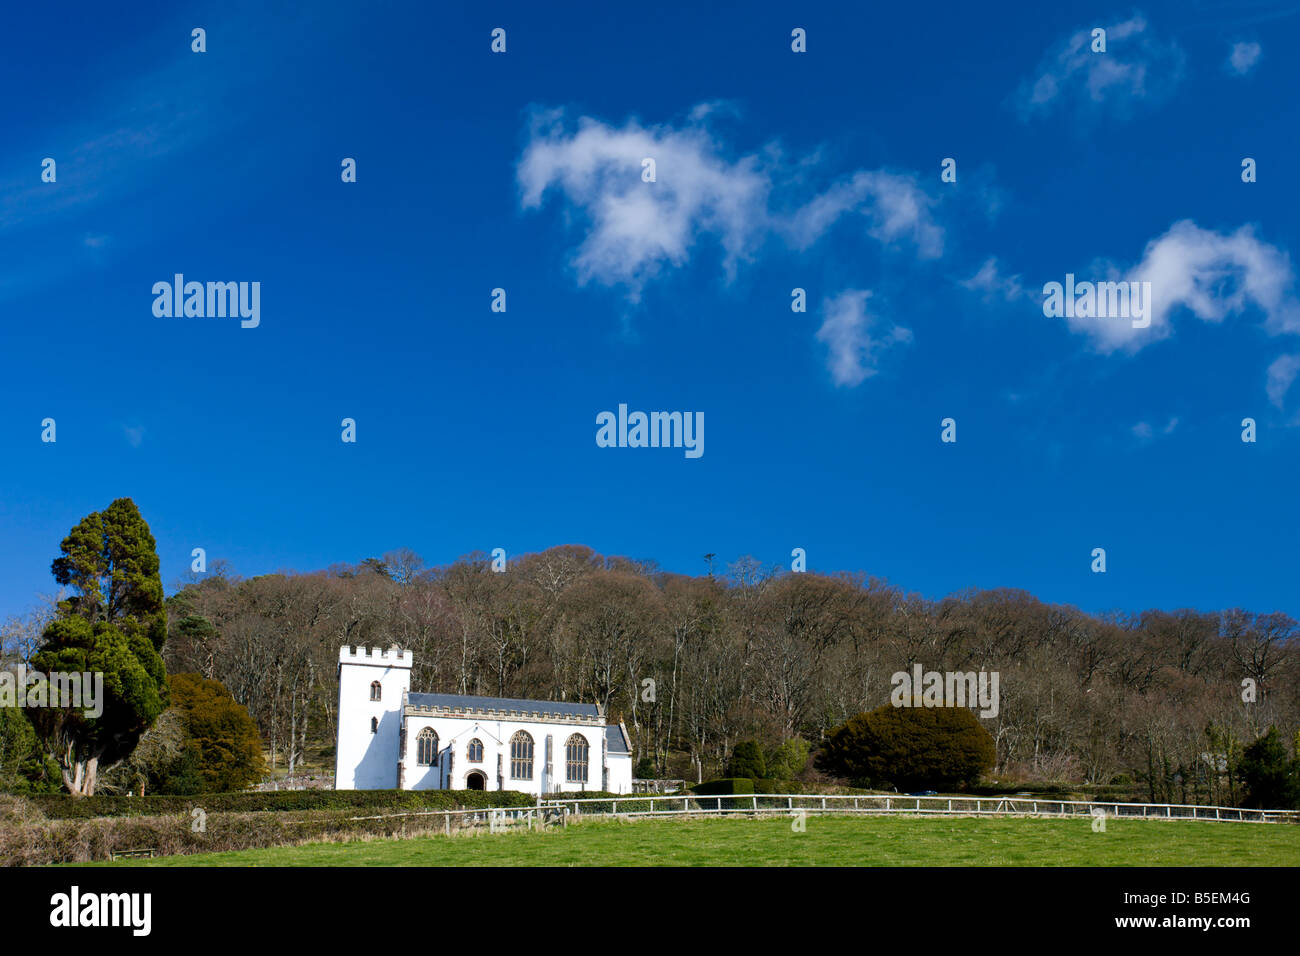 Selworthy chiesa nel Parco Nazionale di Exmoor Somerset Inghilterra Foto Stock